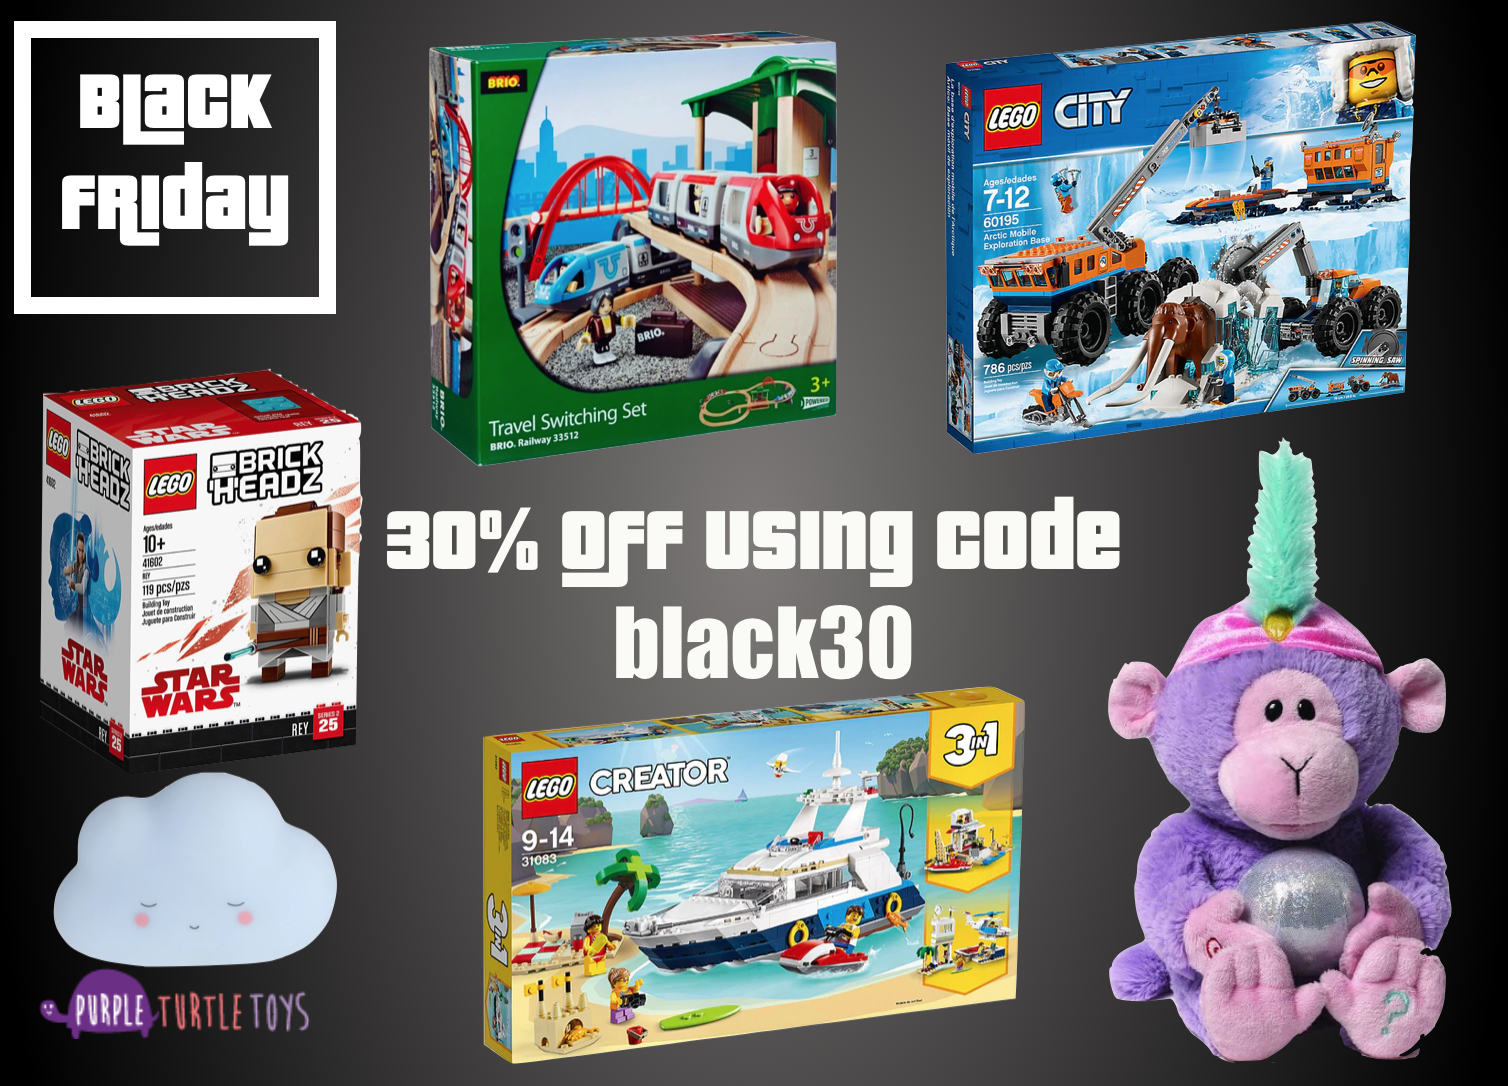 Black Friday Sale at Purple Turtle Toys store